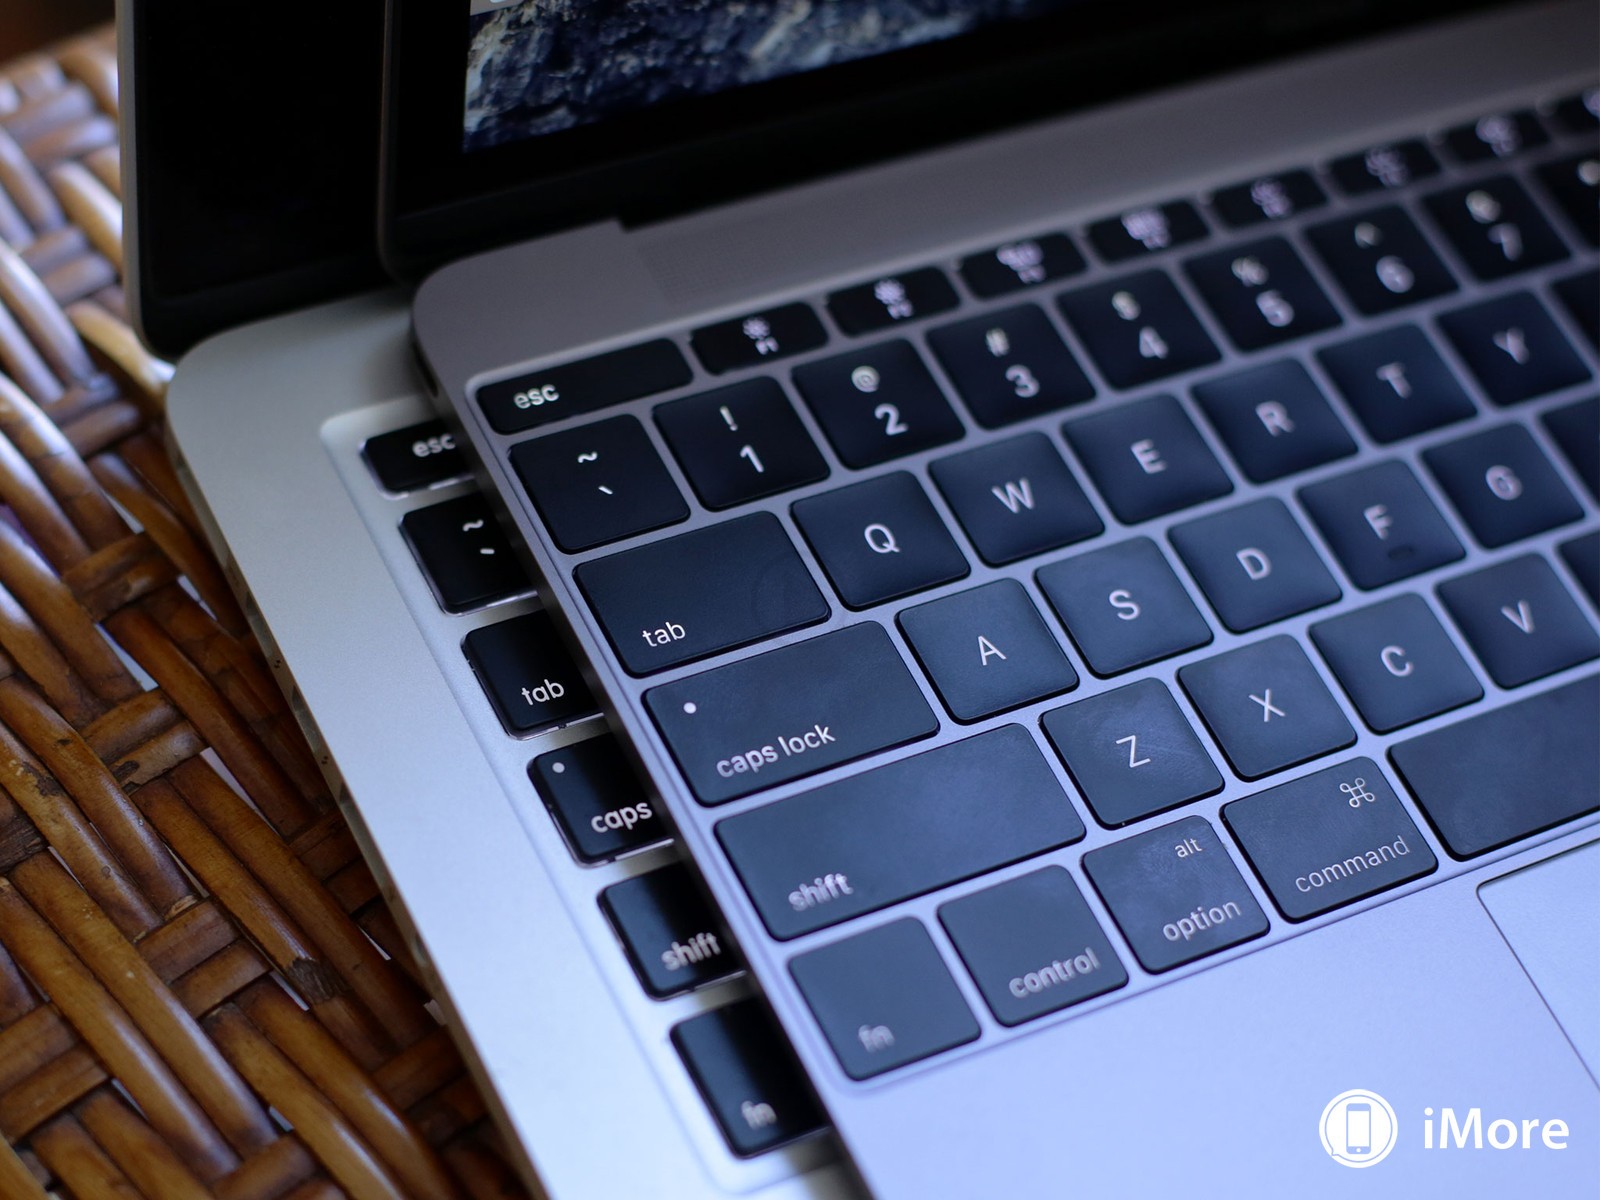 Future Macbook Prospects Of The Company